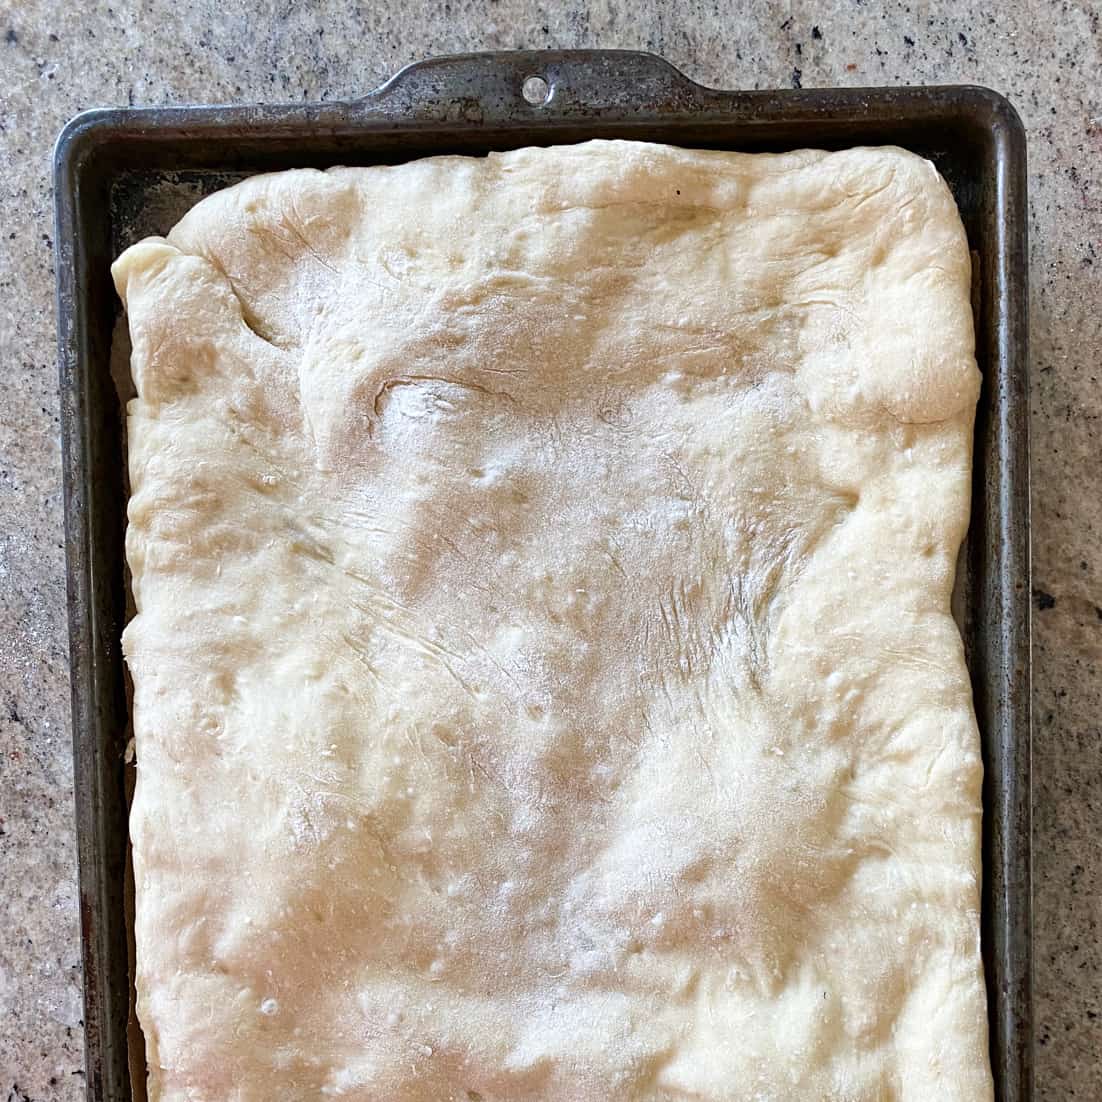 What's the Best Pizza Pan for Baking in a Home Oven? - How To Use